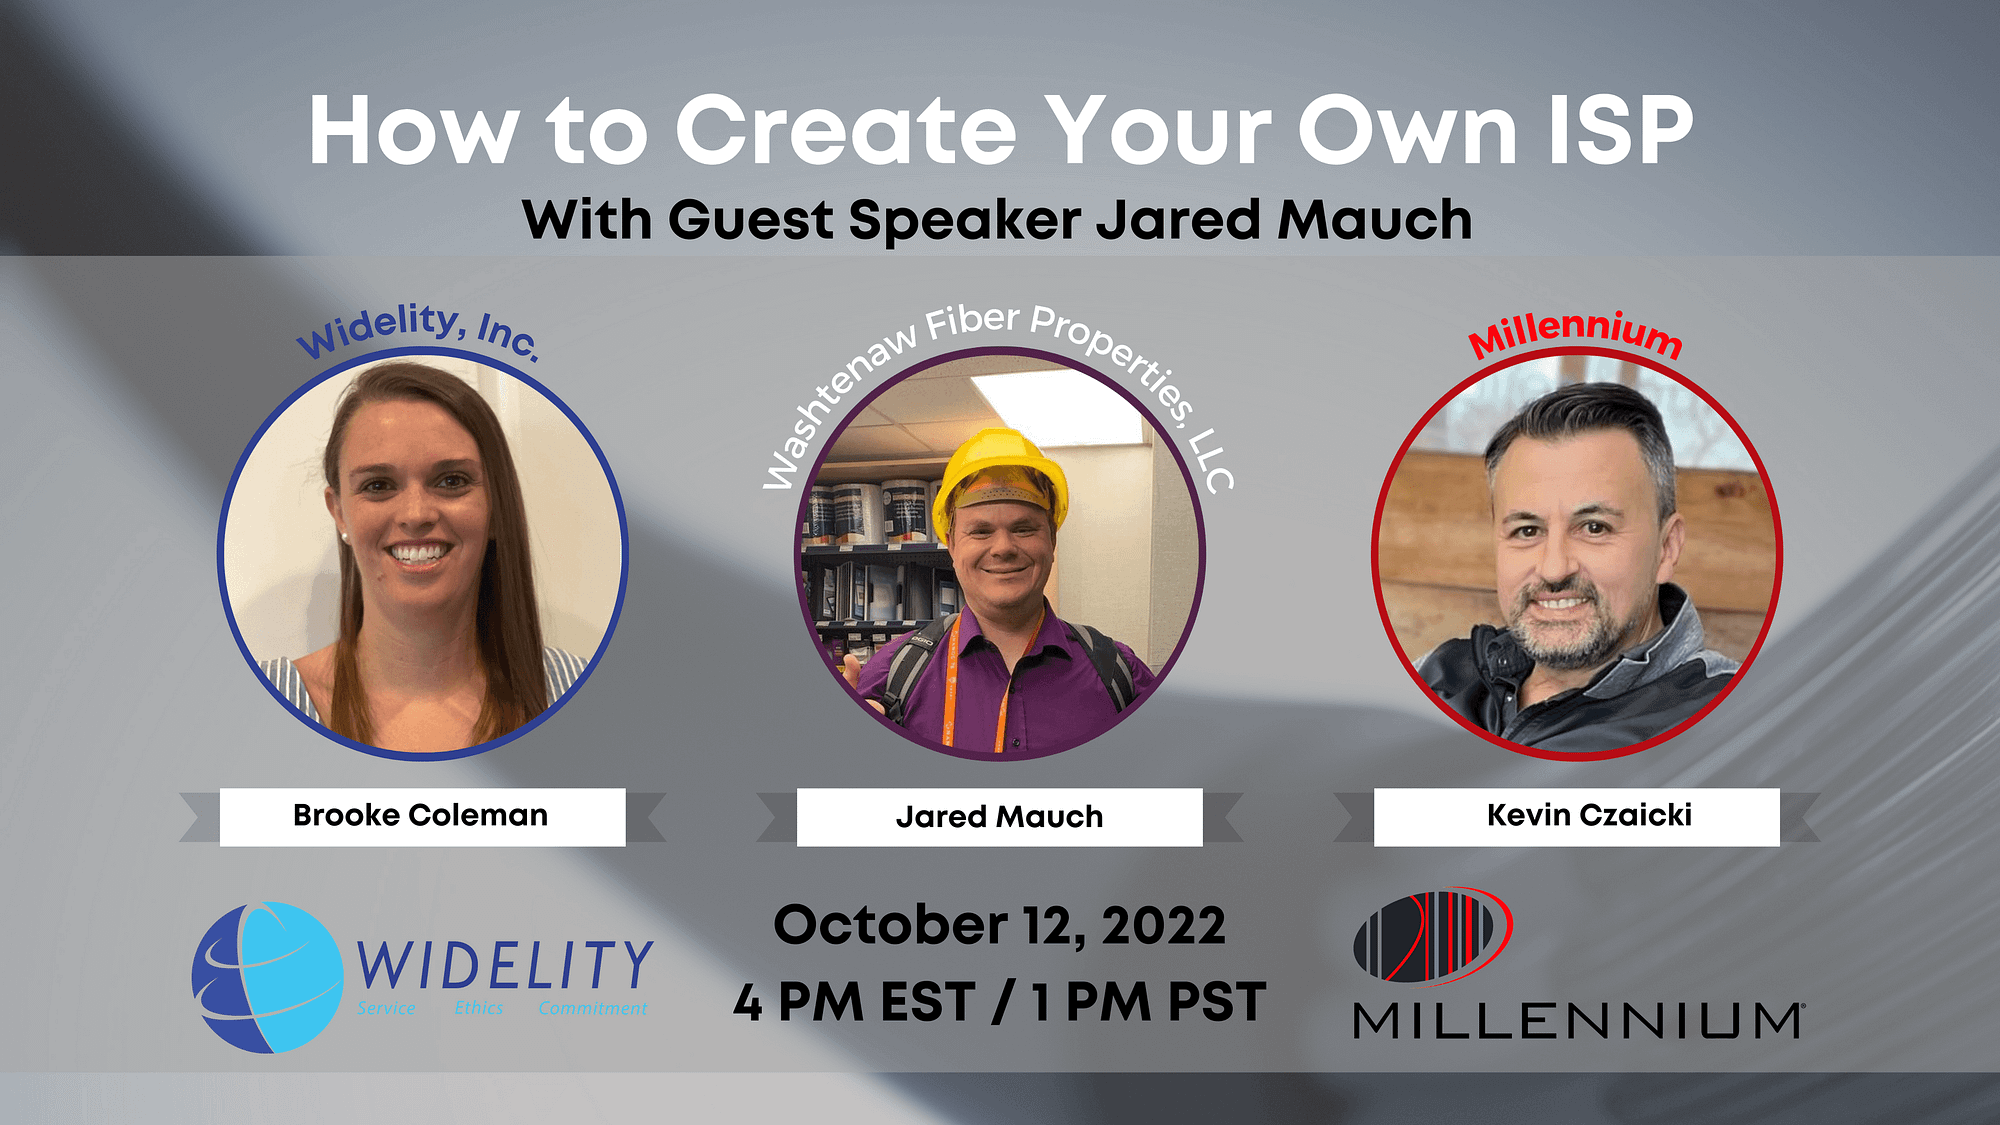 Webinar image for How to Create Your Own ISP, Jared Mauch talks Broadband funding with Widelity and Millennium